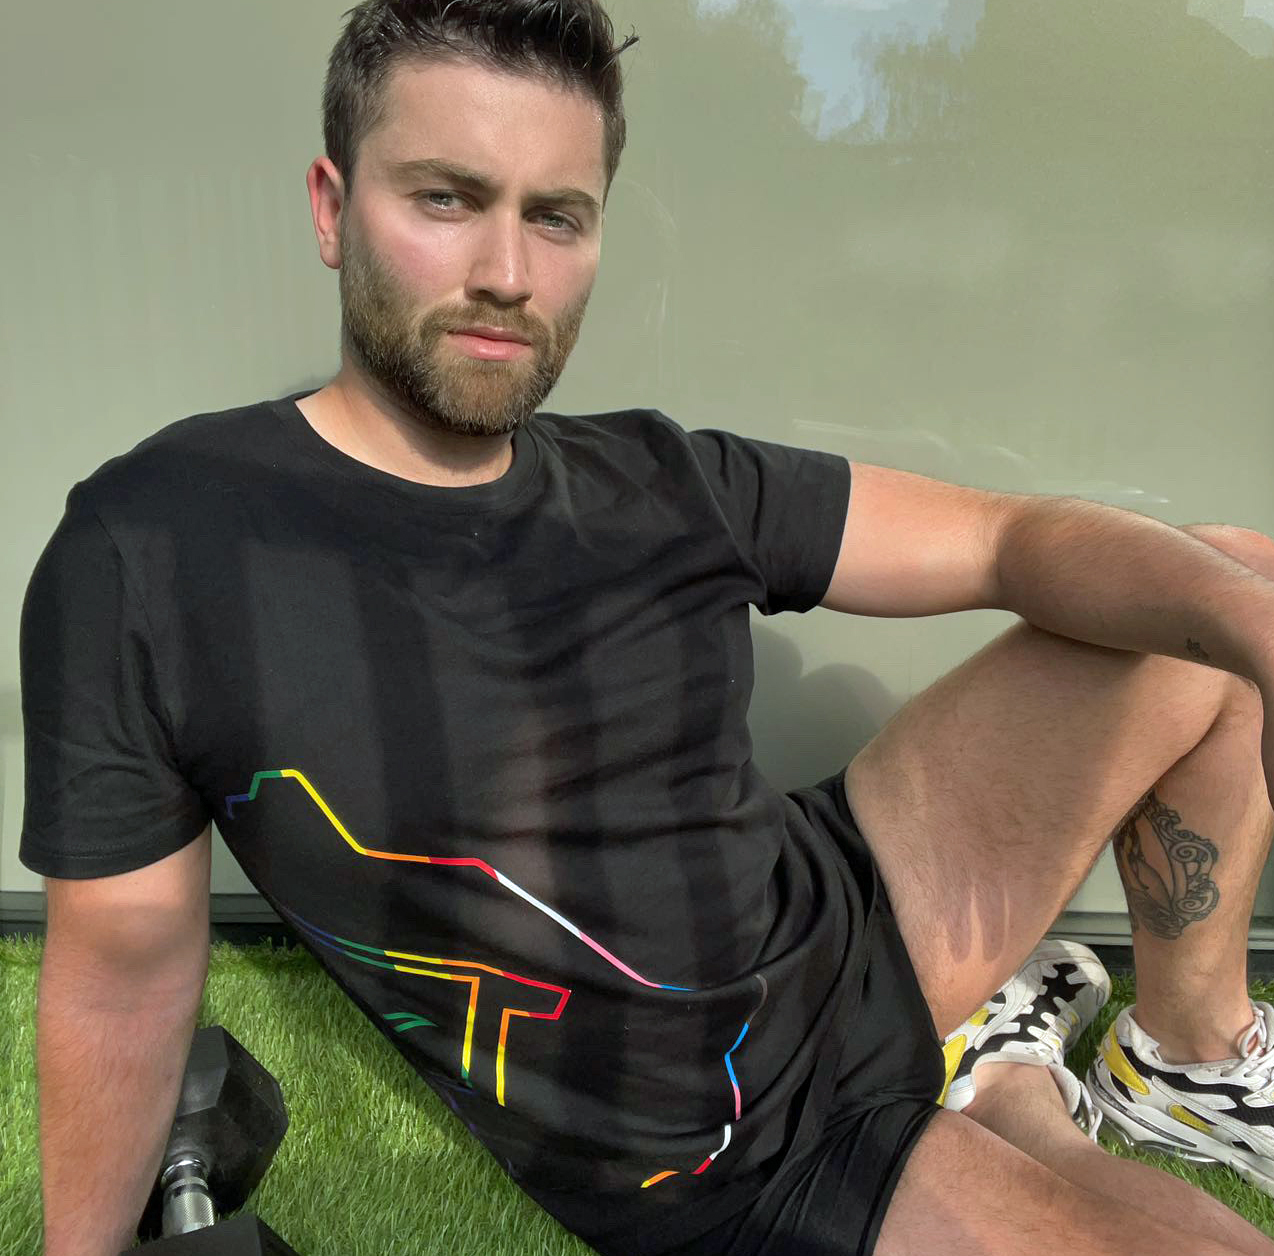 Den's pride t-shirt, showing black with rainbow logo, as worn by a model